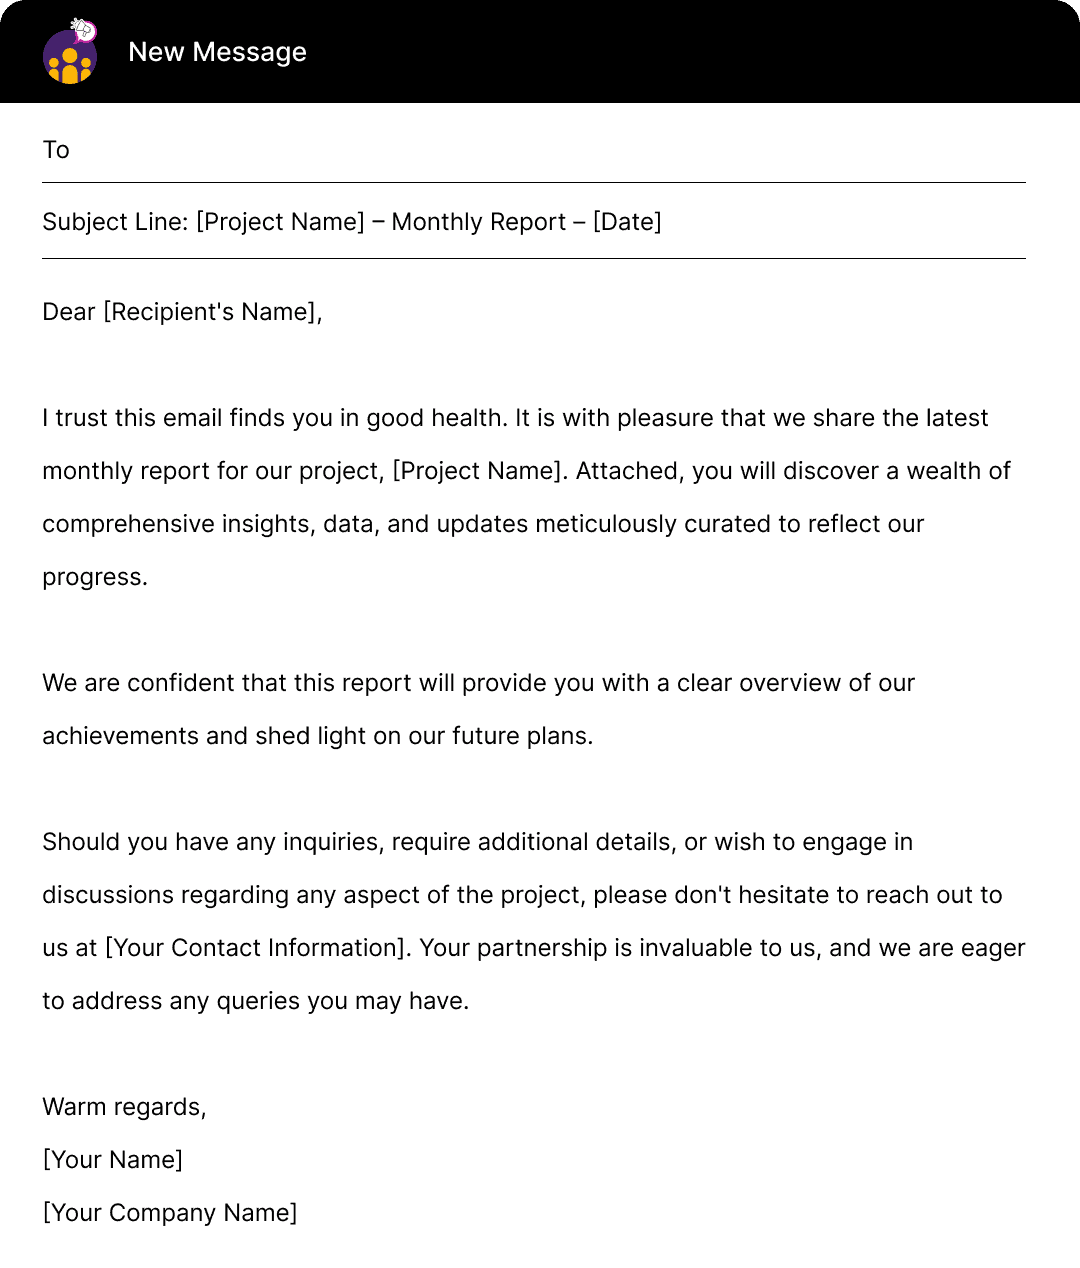 Sending Project Reports – Email Template For Email With Attachments File